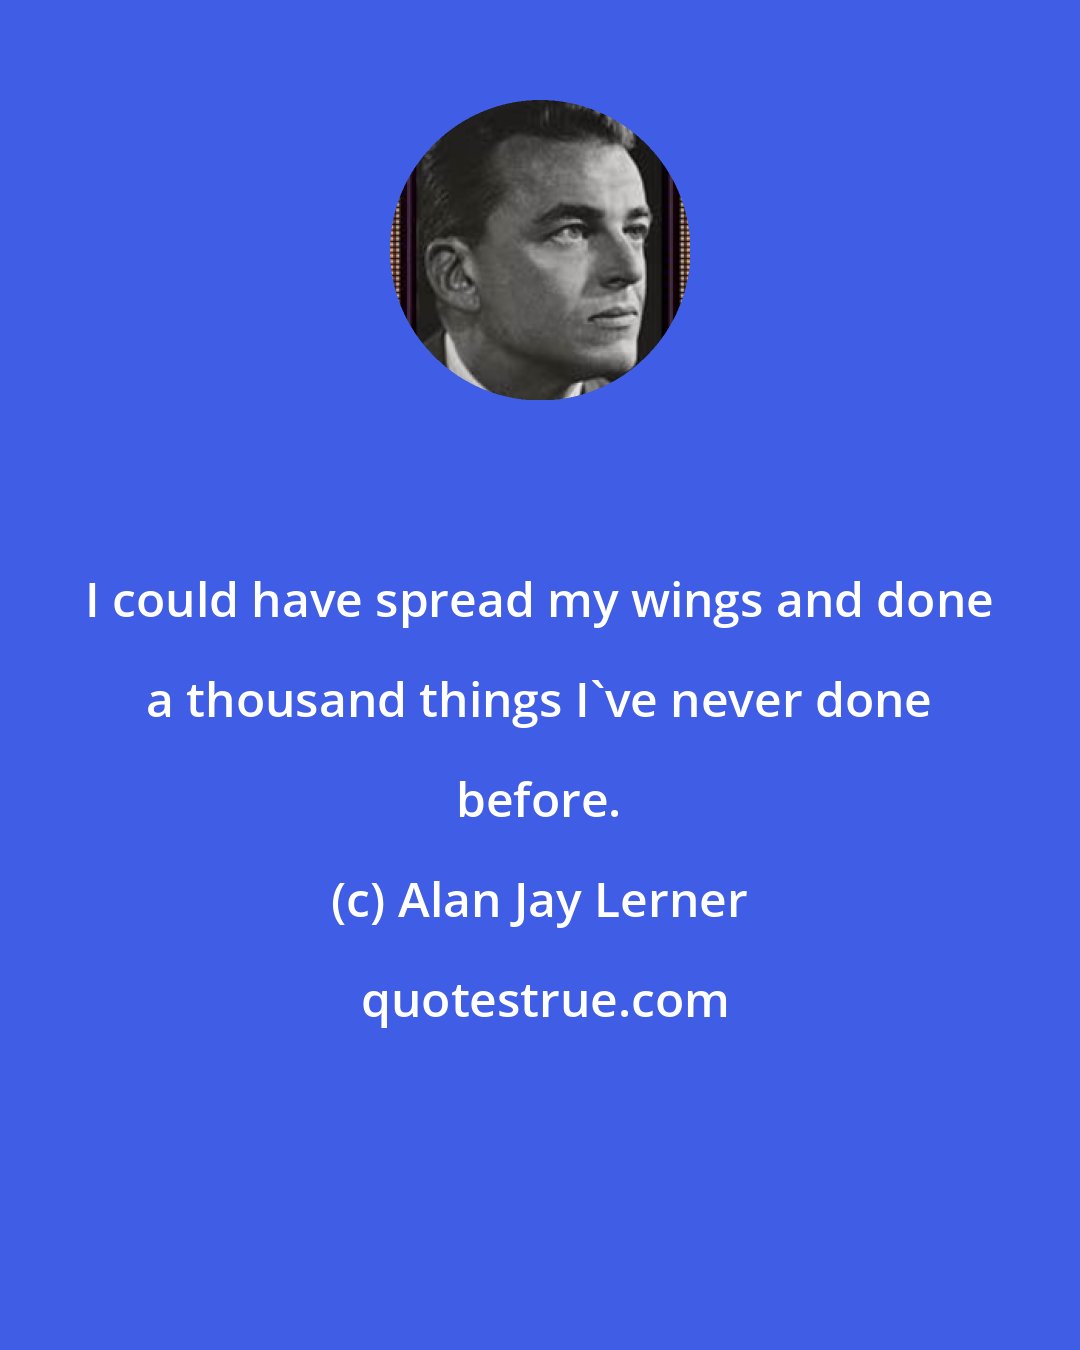 Alan Jay Lerner: I could have spread my wings and done a thousand things I've never done before.